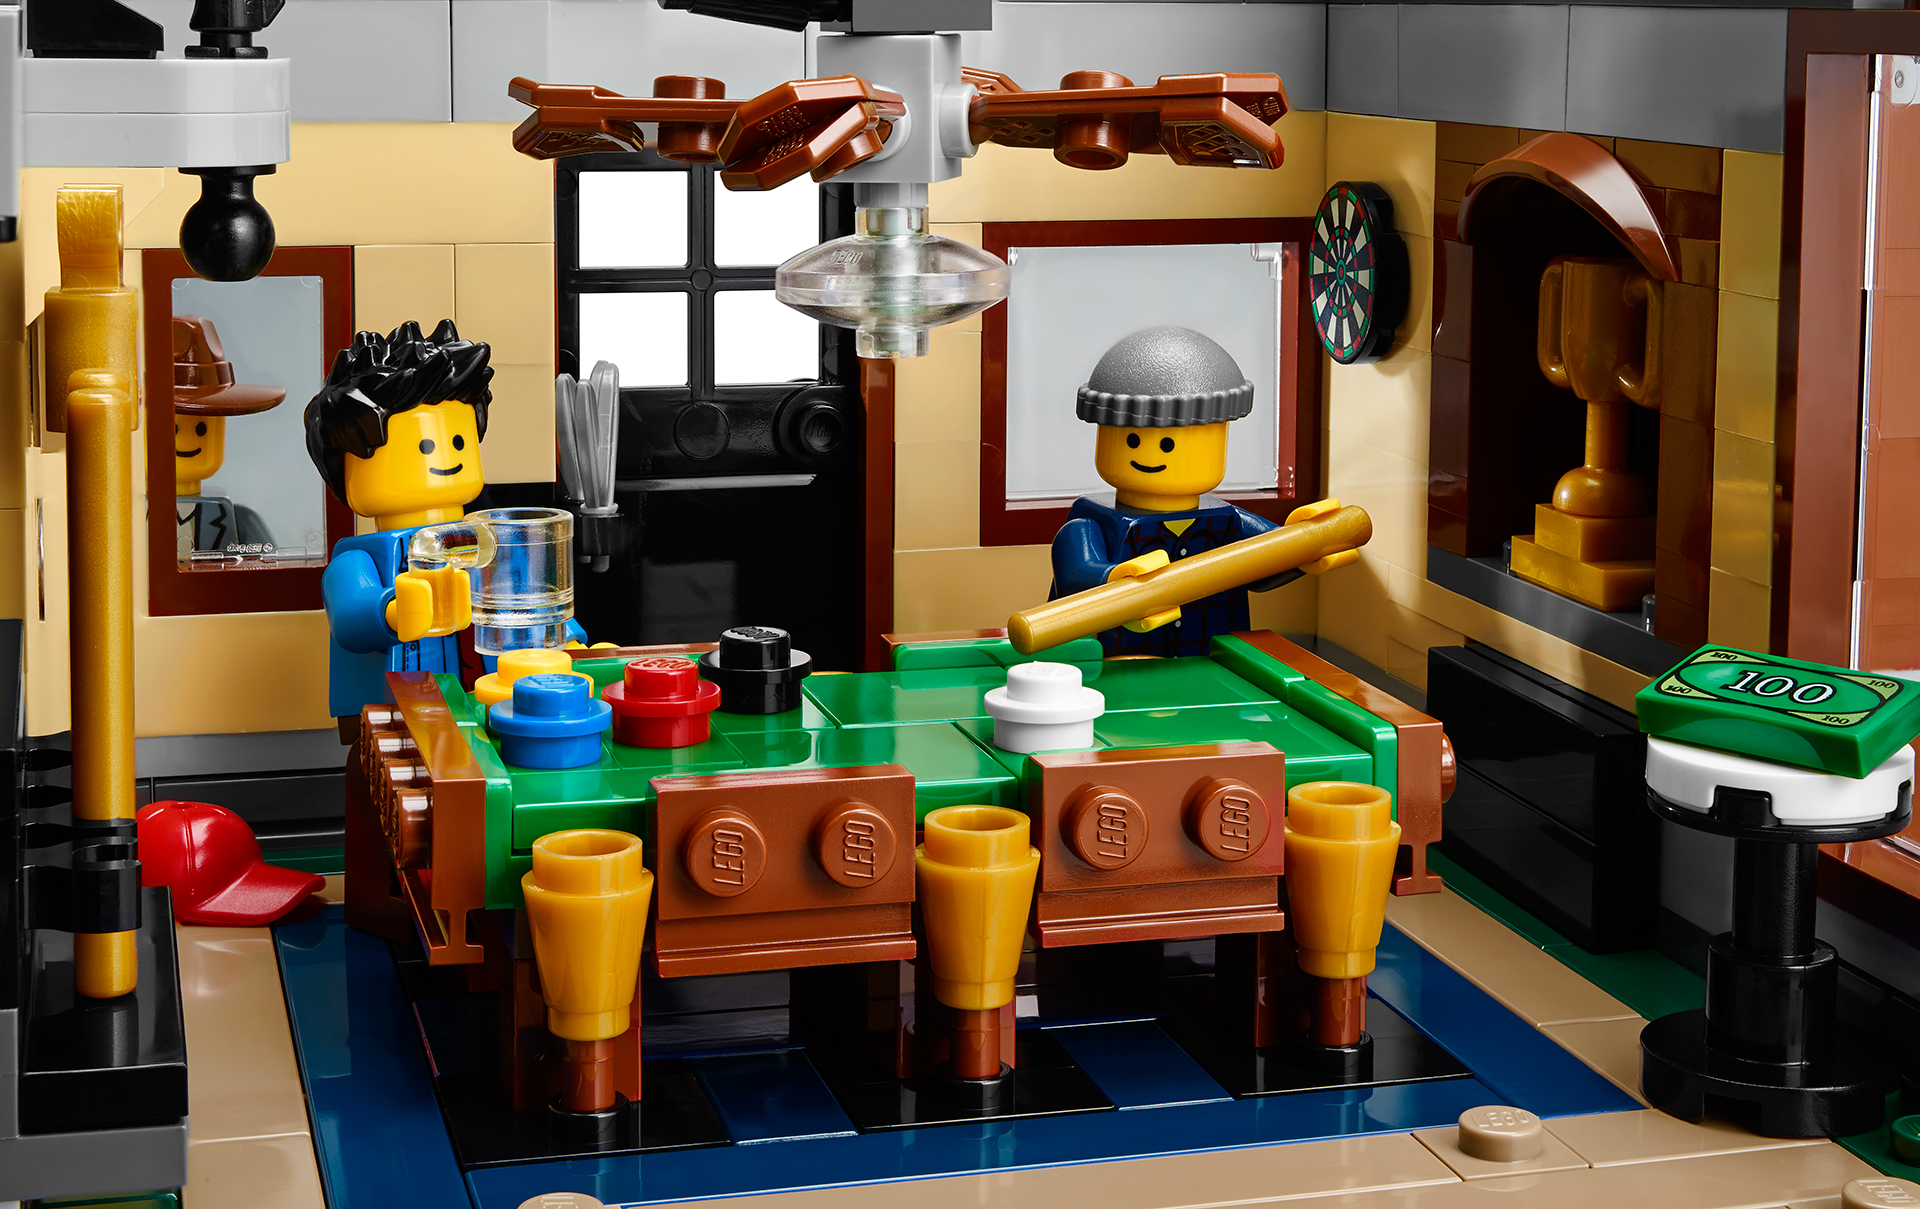 The LEGO Detective’s Office Has A Story To Tell